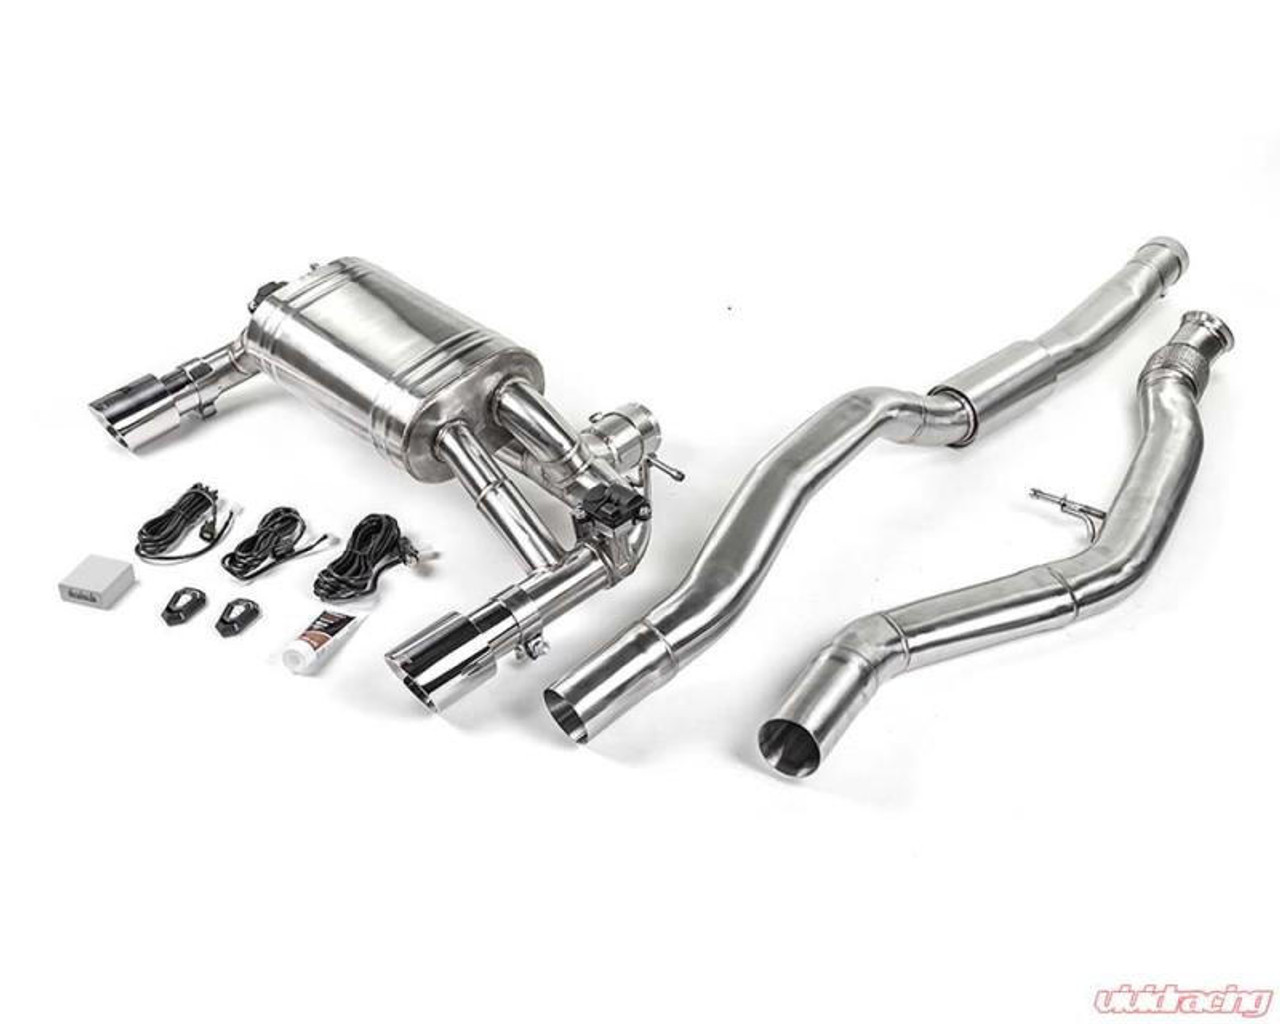 Vivid Racing VR Performance BMW M235i F22 Valvetronic 304 Stainless Exhaust System - VR-M235-170S 